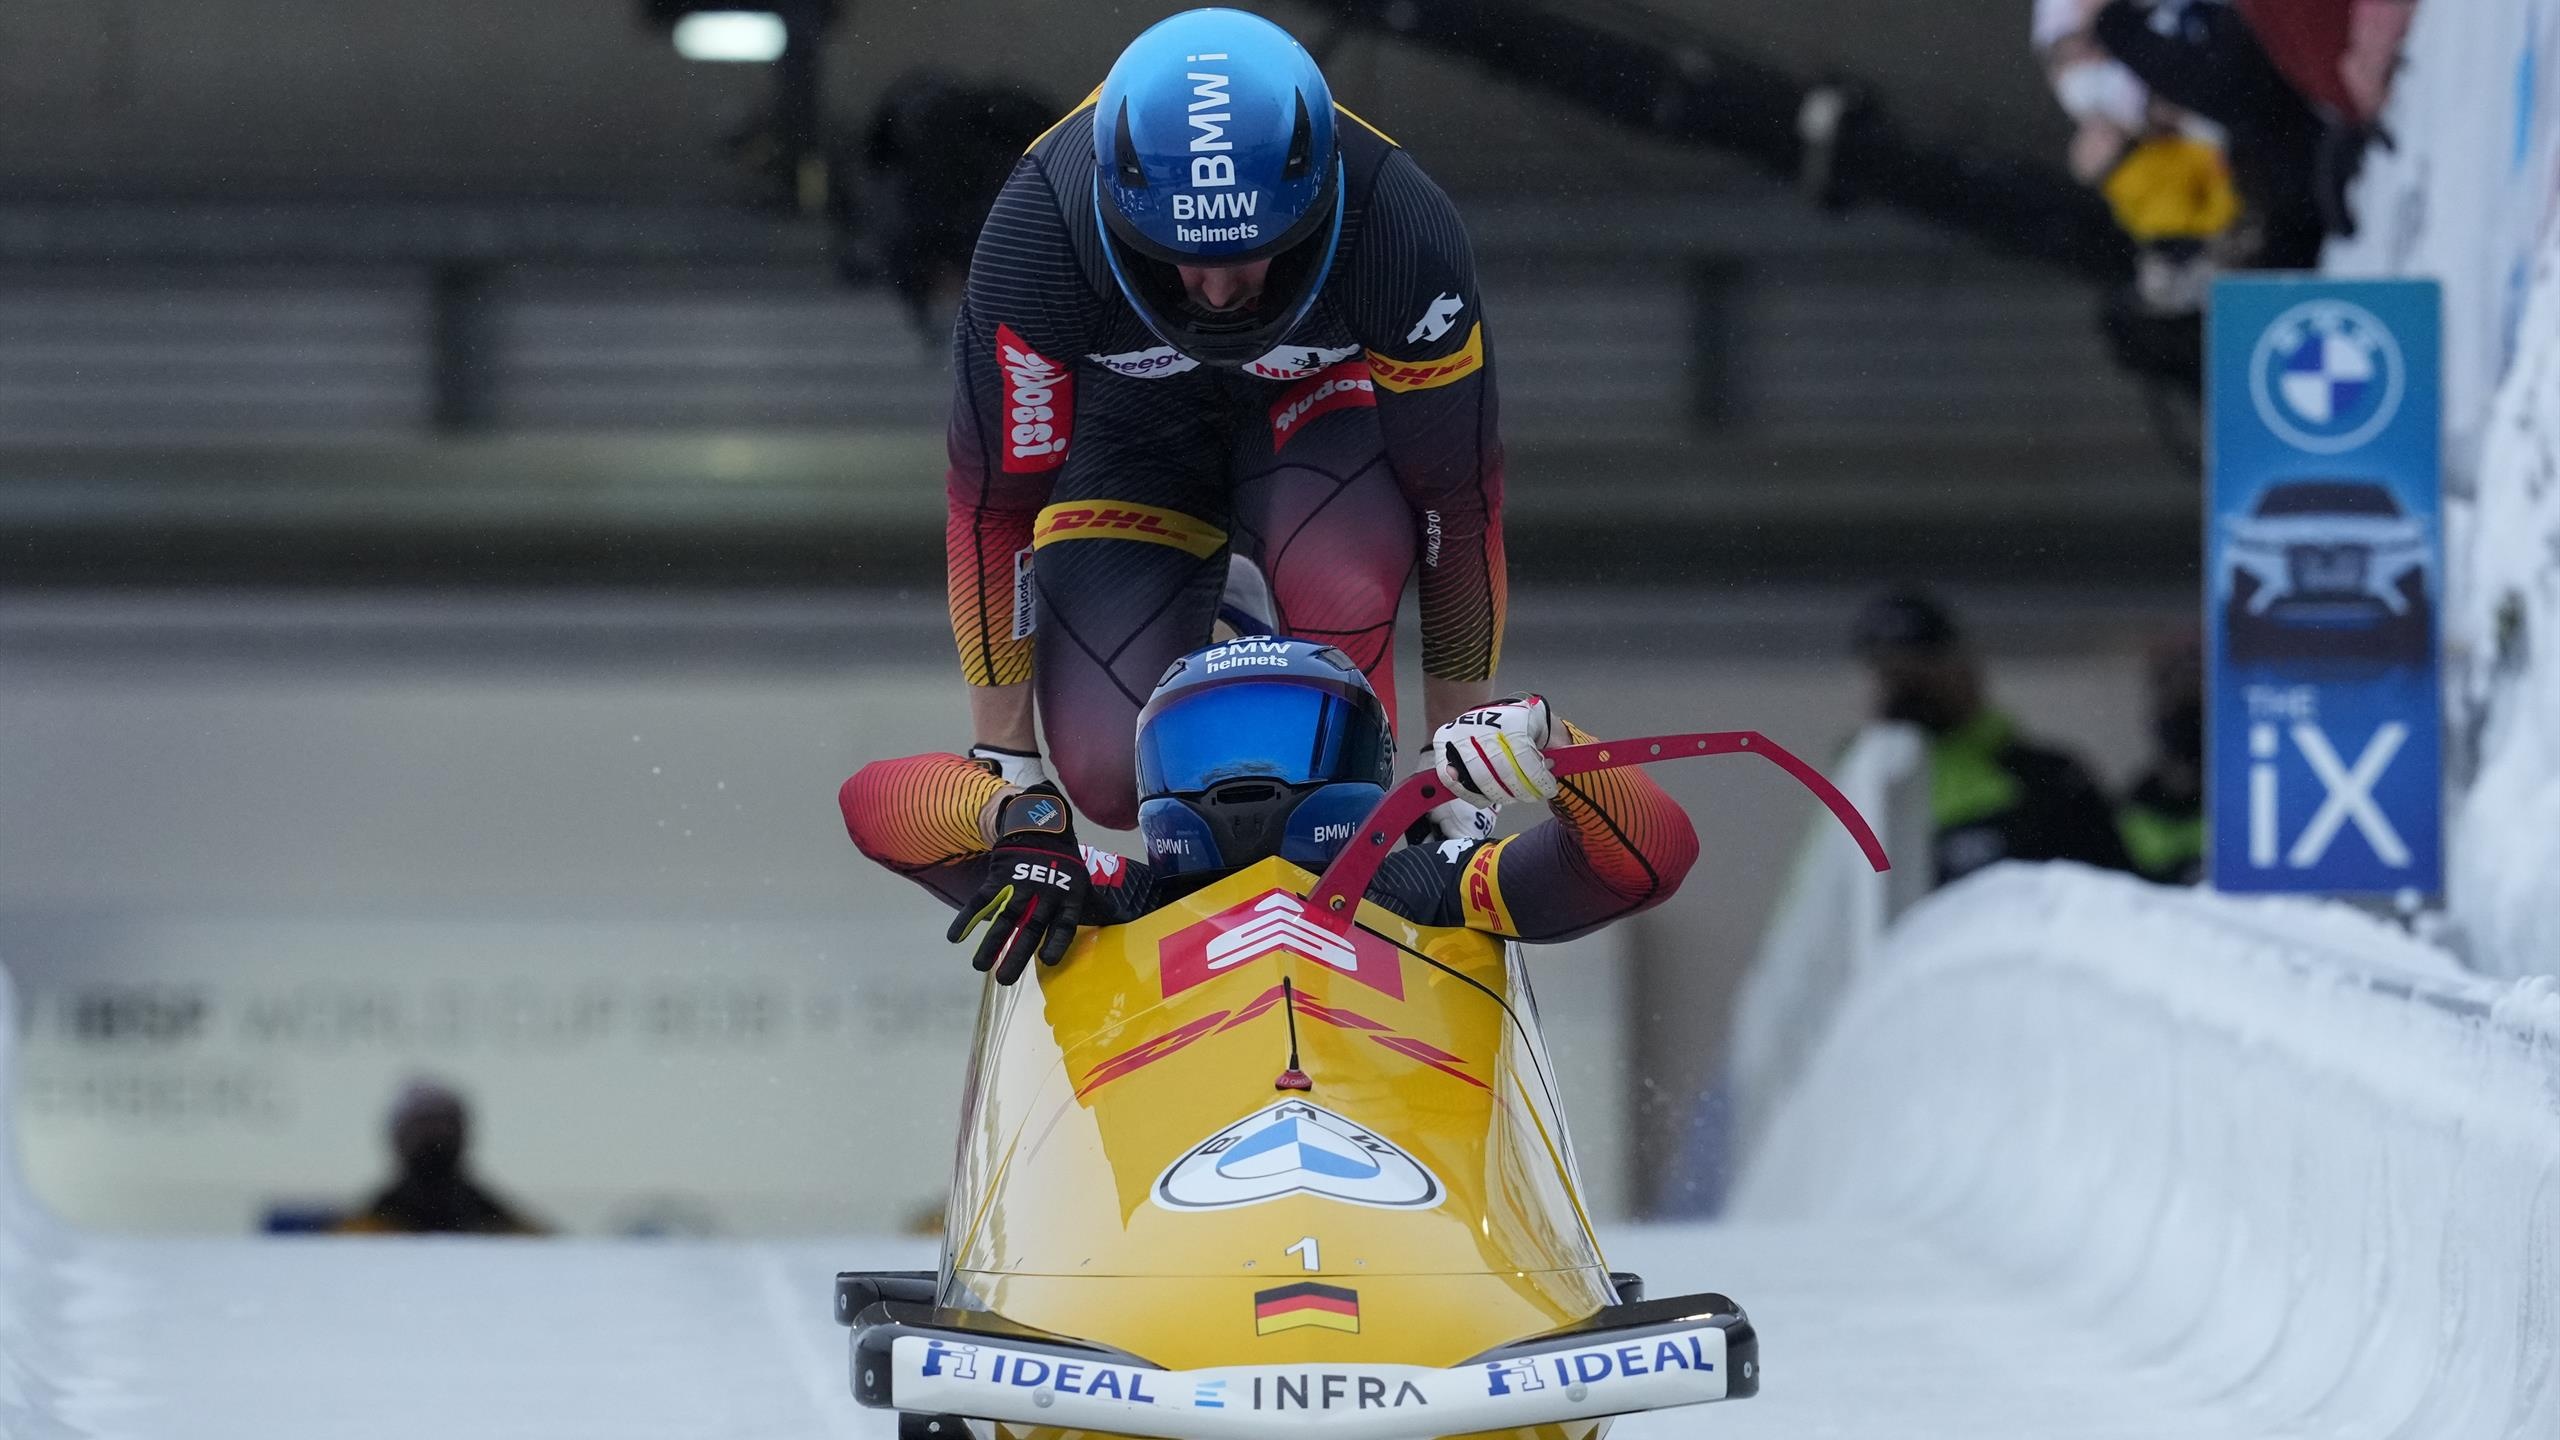 Bobsleigh: A championship organized by Germany's Bobsleigh, Luge and Skeleton Federation. 2560x1440 HD Wallpaper.